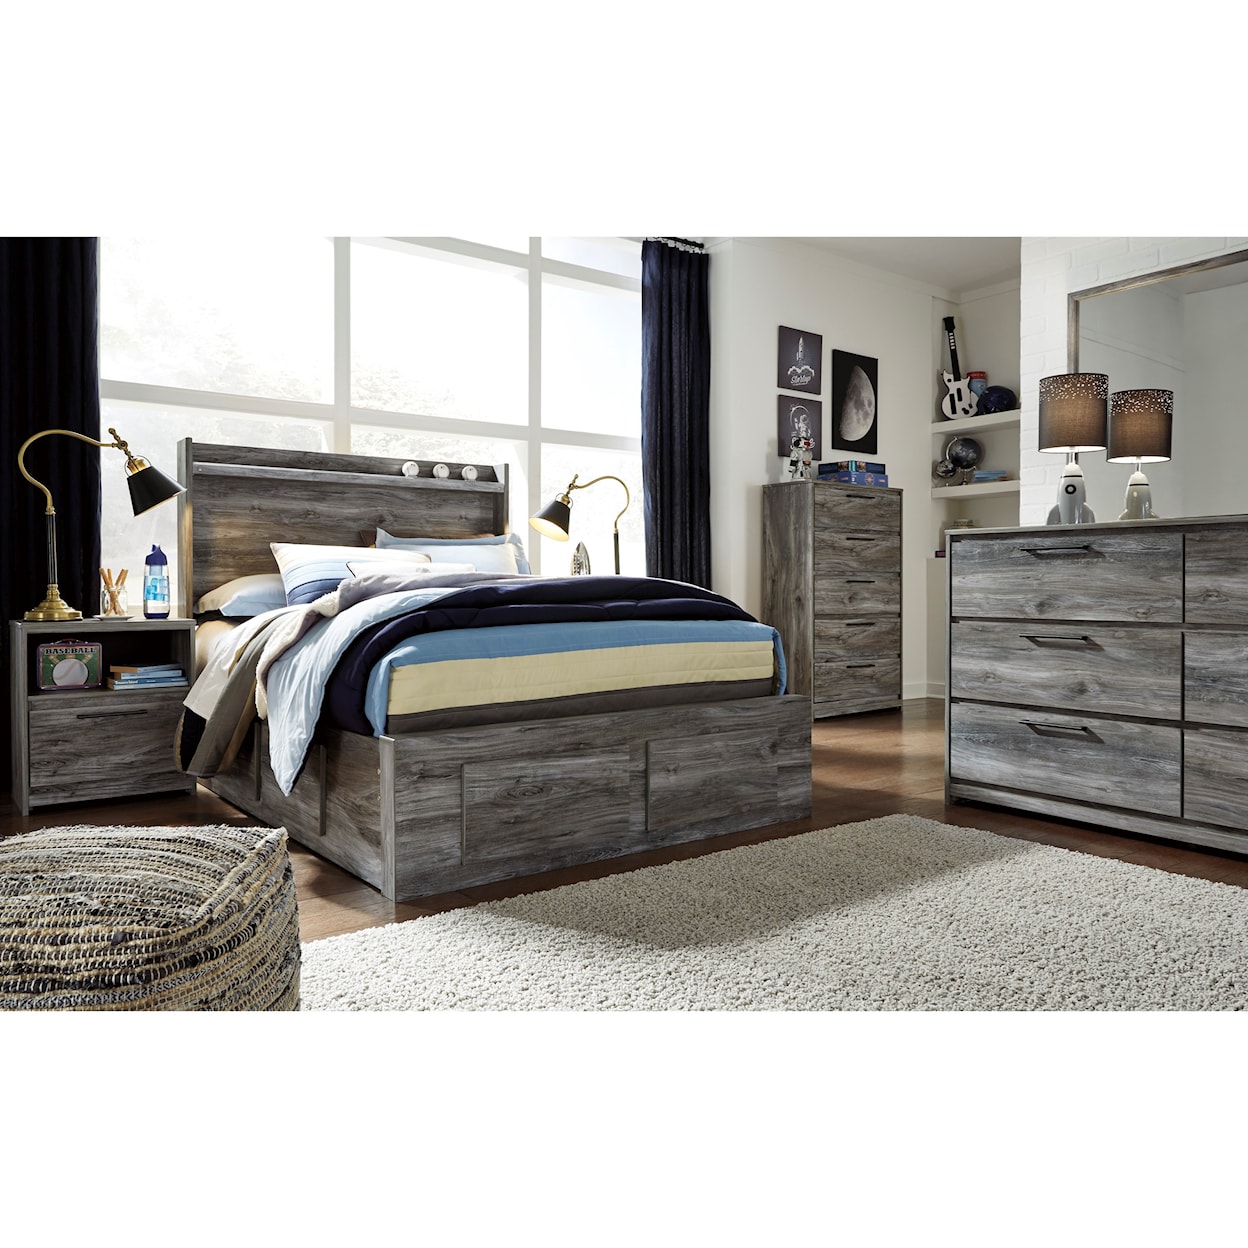 Ashley Signature Design Baystorm Full Storage Bed with 6 Drawers